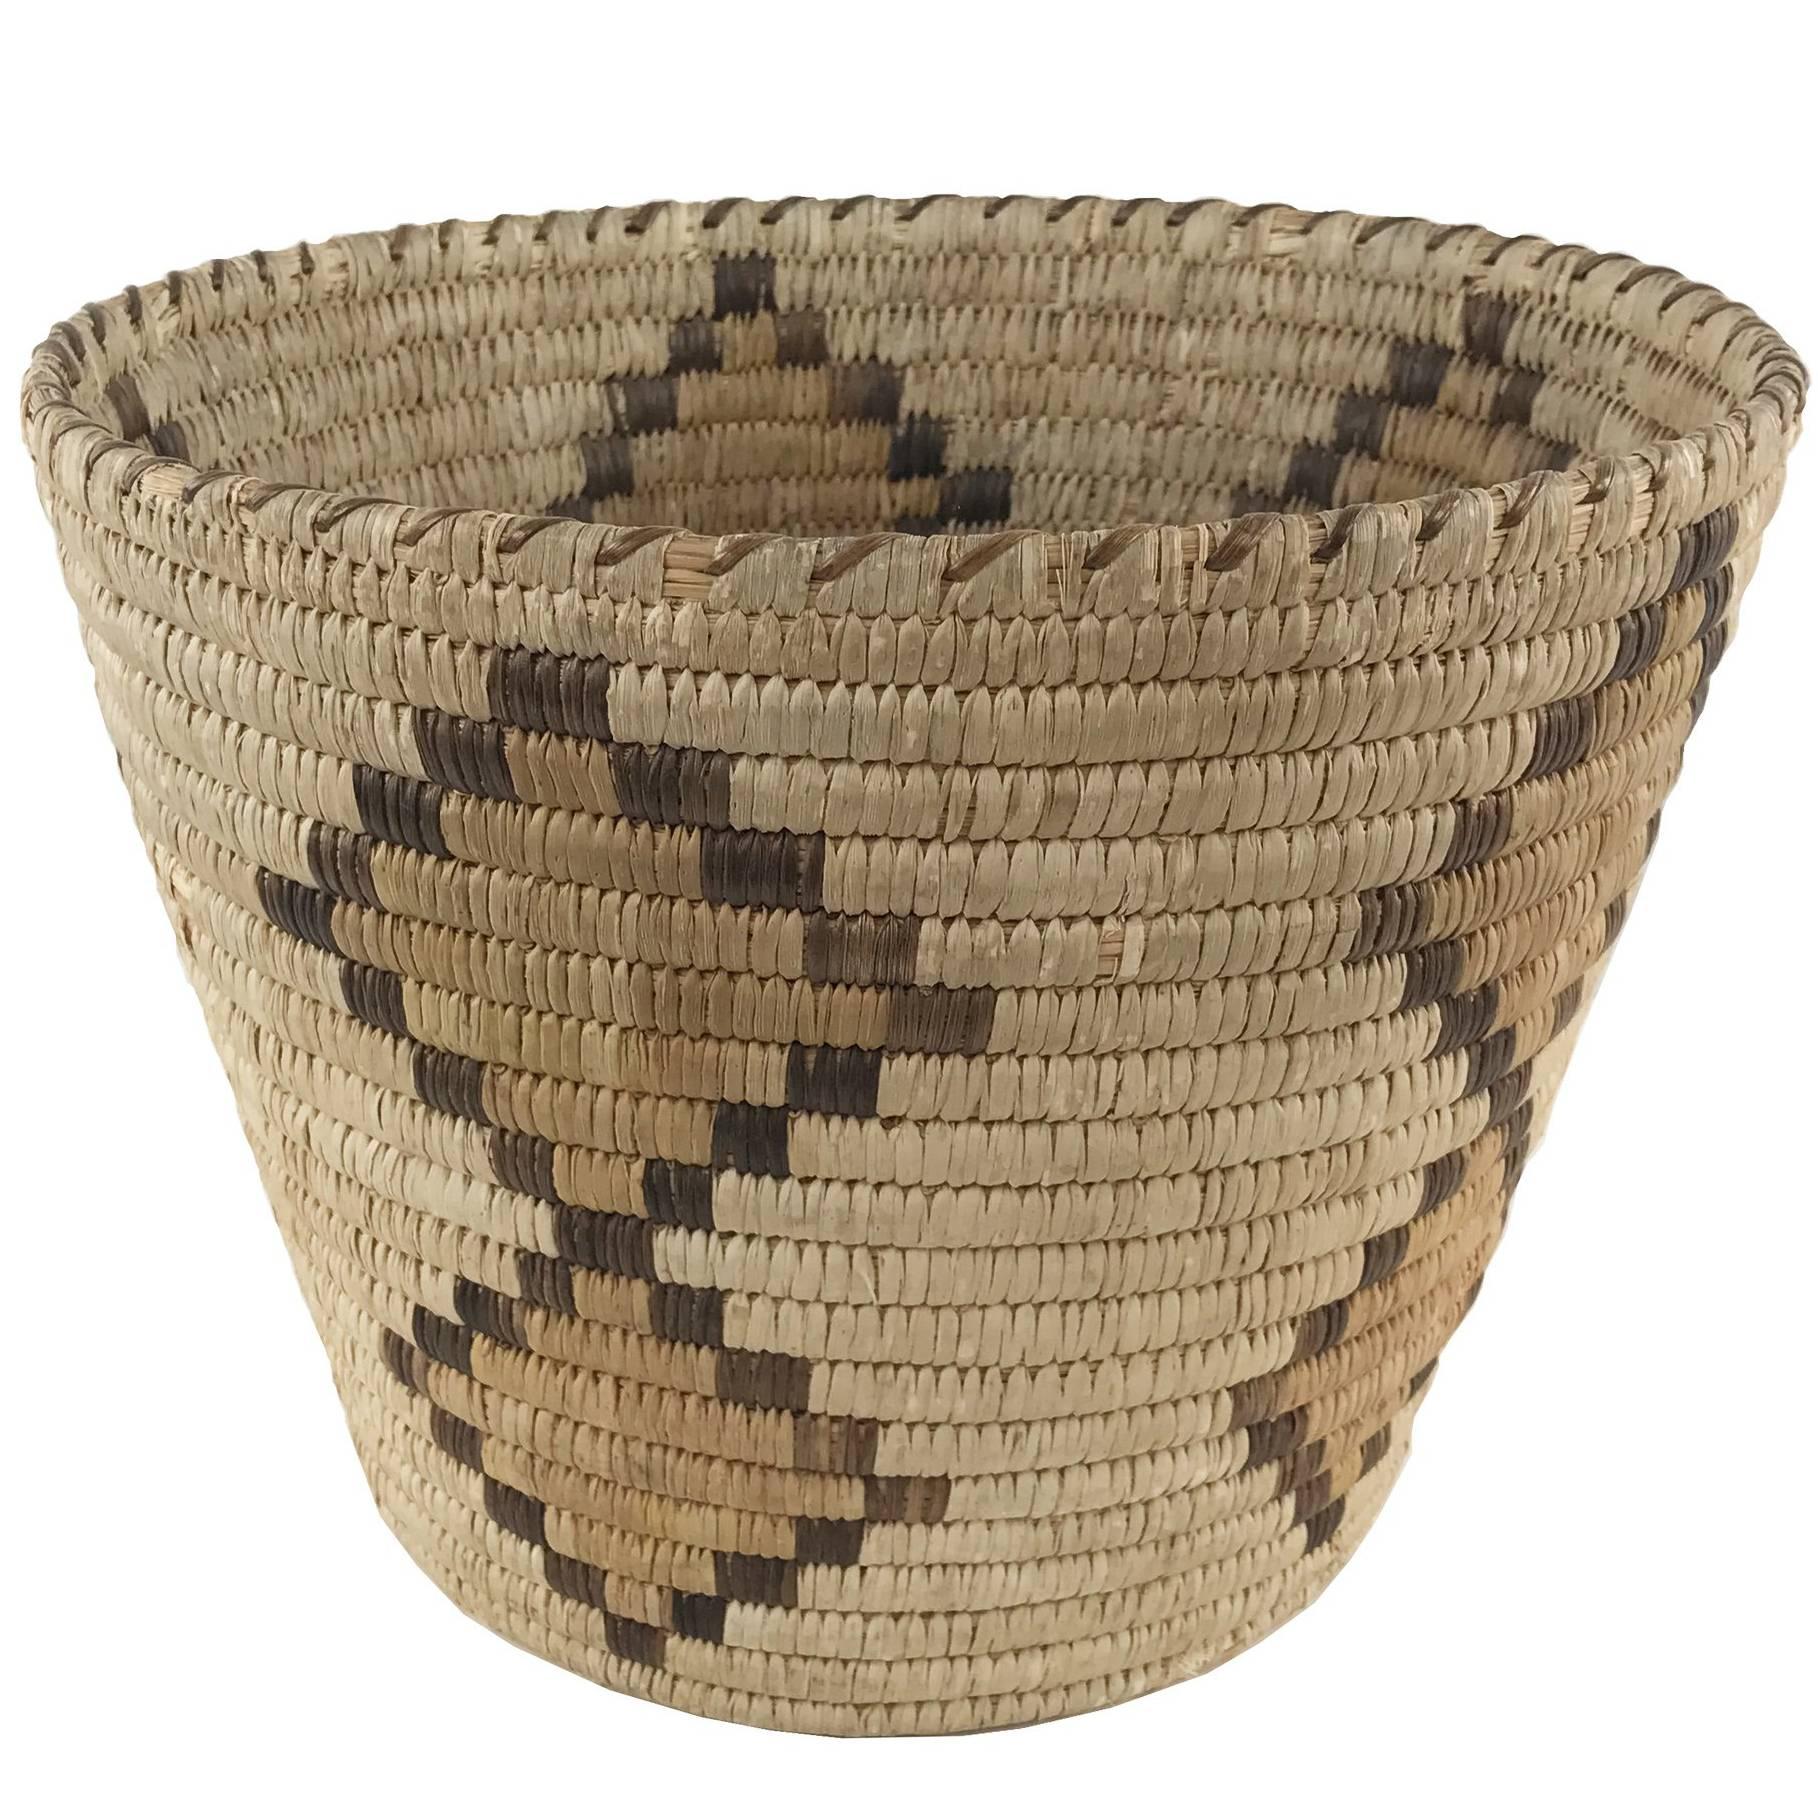 Twined Native American Basket with Diamond Motif